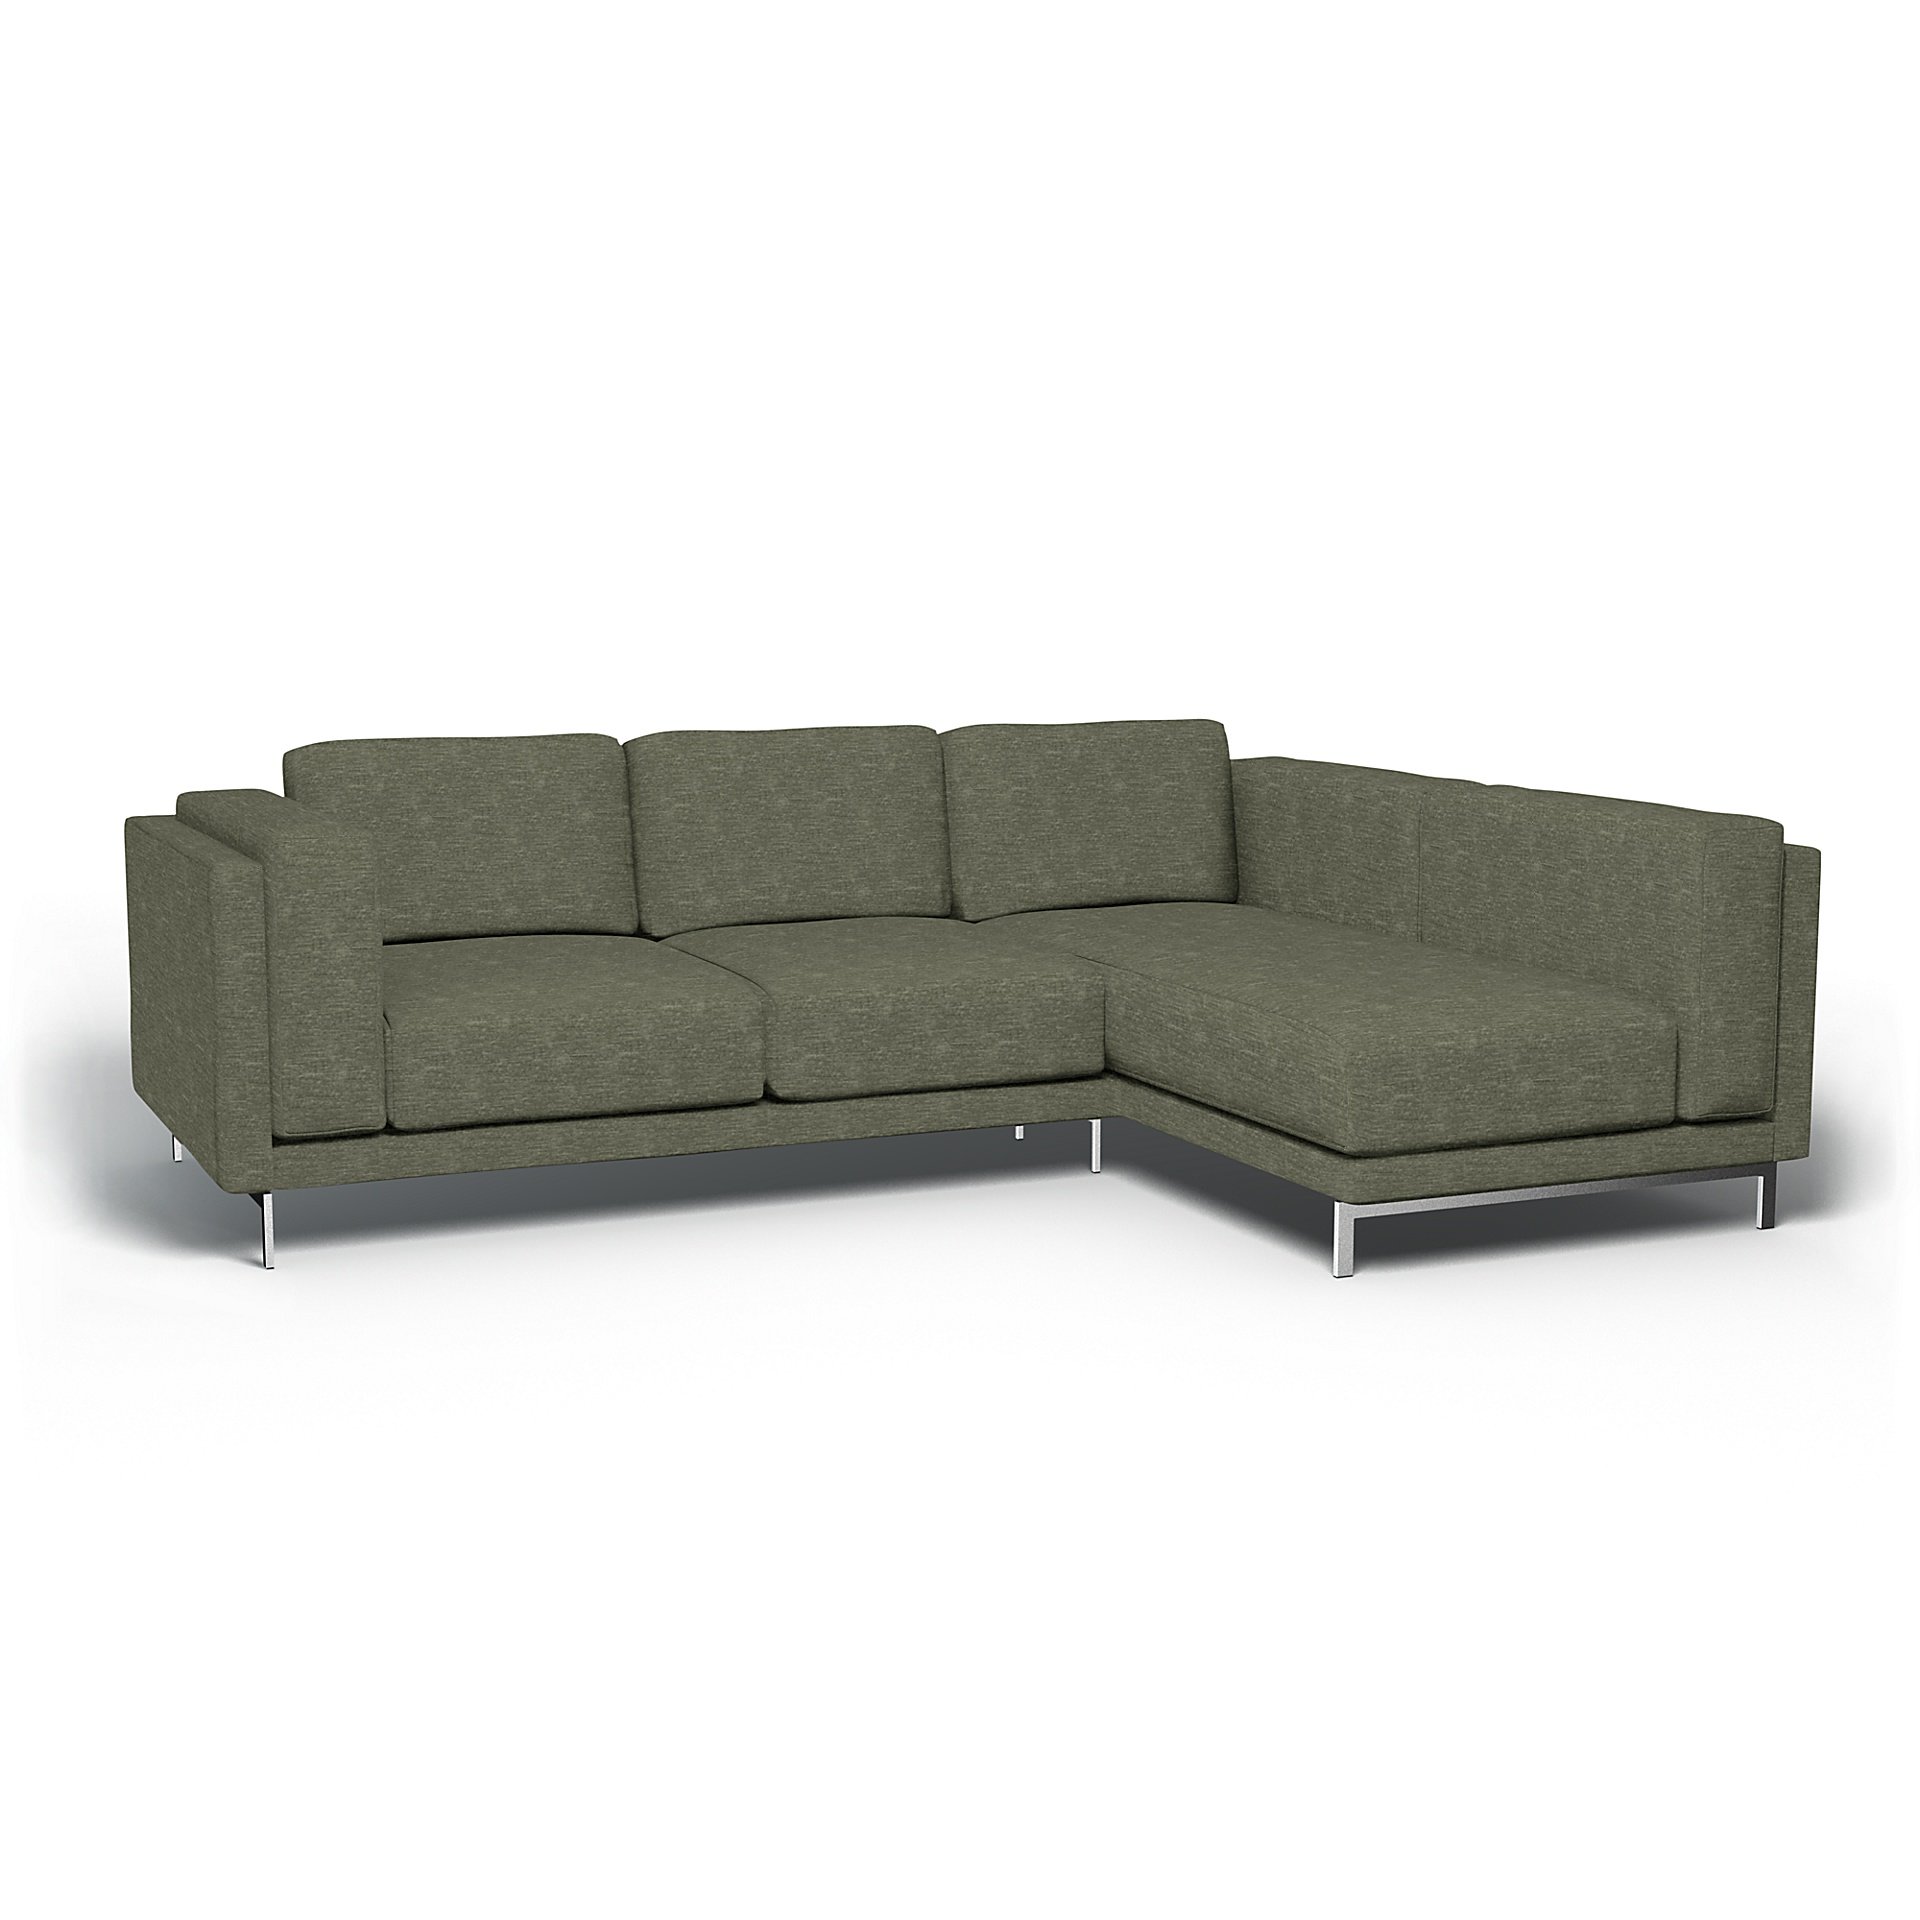 IKEA - Nockeby 3 Seat Sofa with Right Chaise Cover, Green Grey, Velvet - Bemz